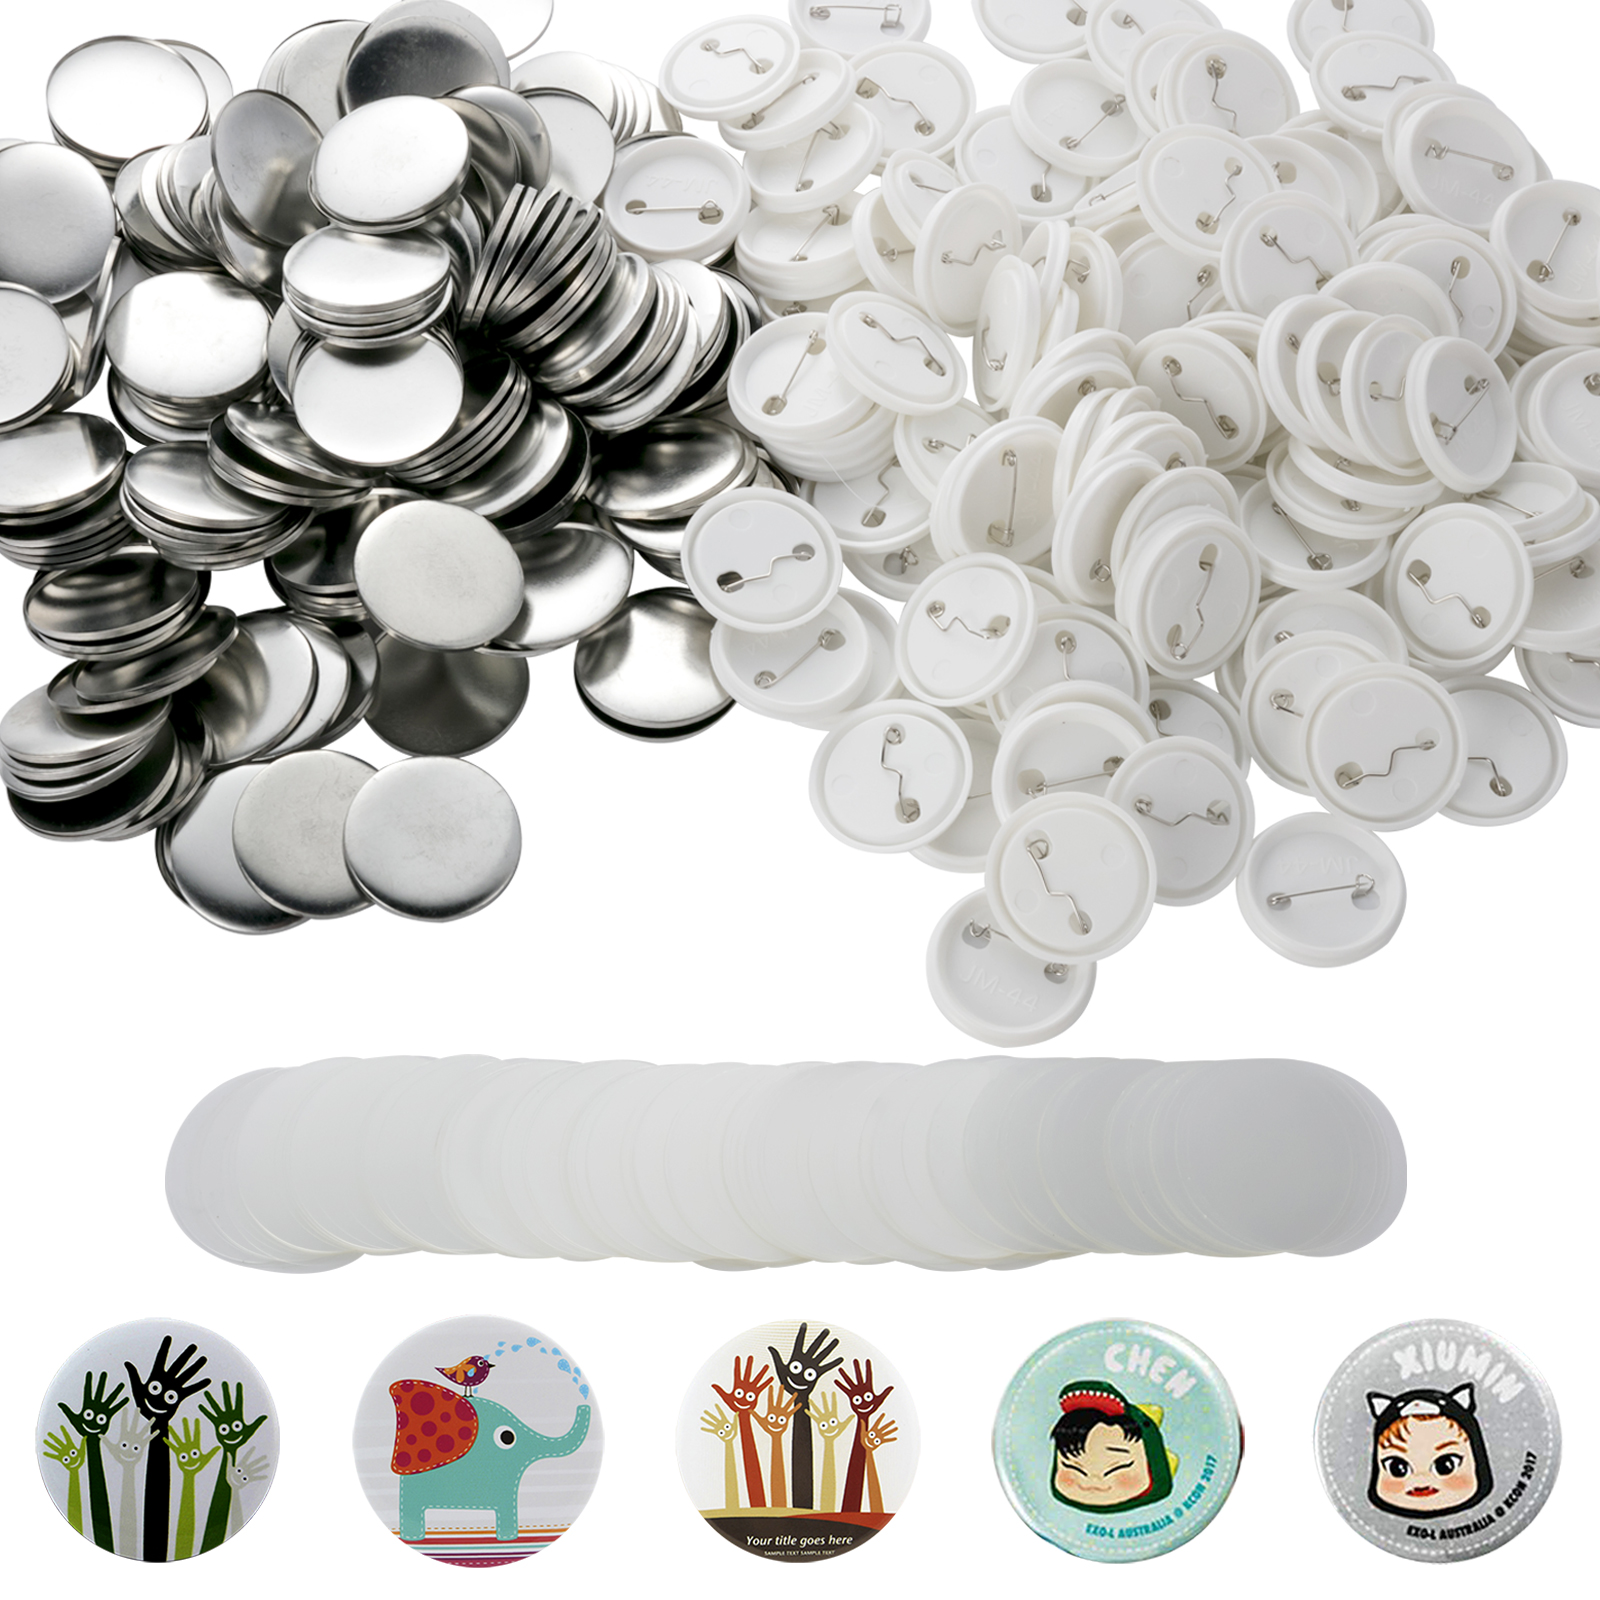 200Sets 44mm/1.73 inch Blank Button Supplies Badges Buttons Parts for  Button Maker 44mm Button Attachment, Button Making Supplies with Round Pin